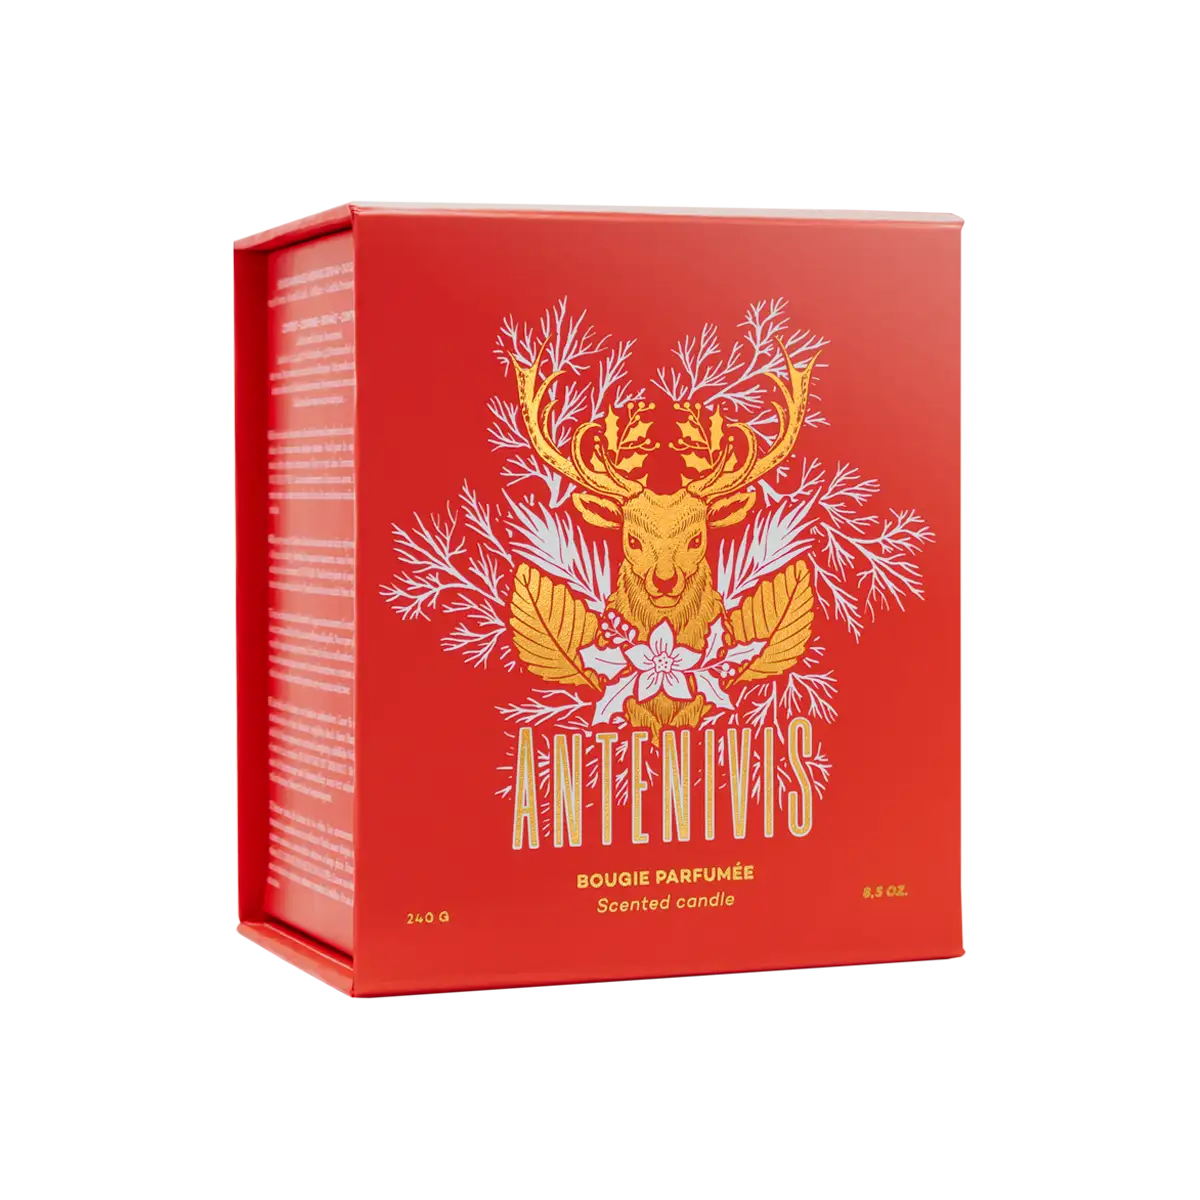 ANTENIVIS Scented Candle 240gr - Available from 10th of December